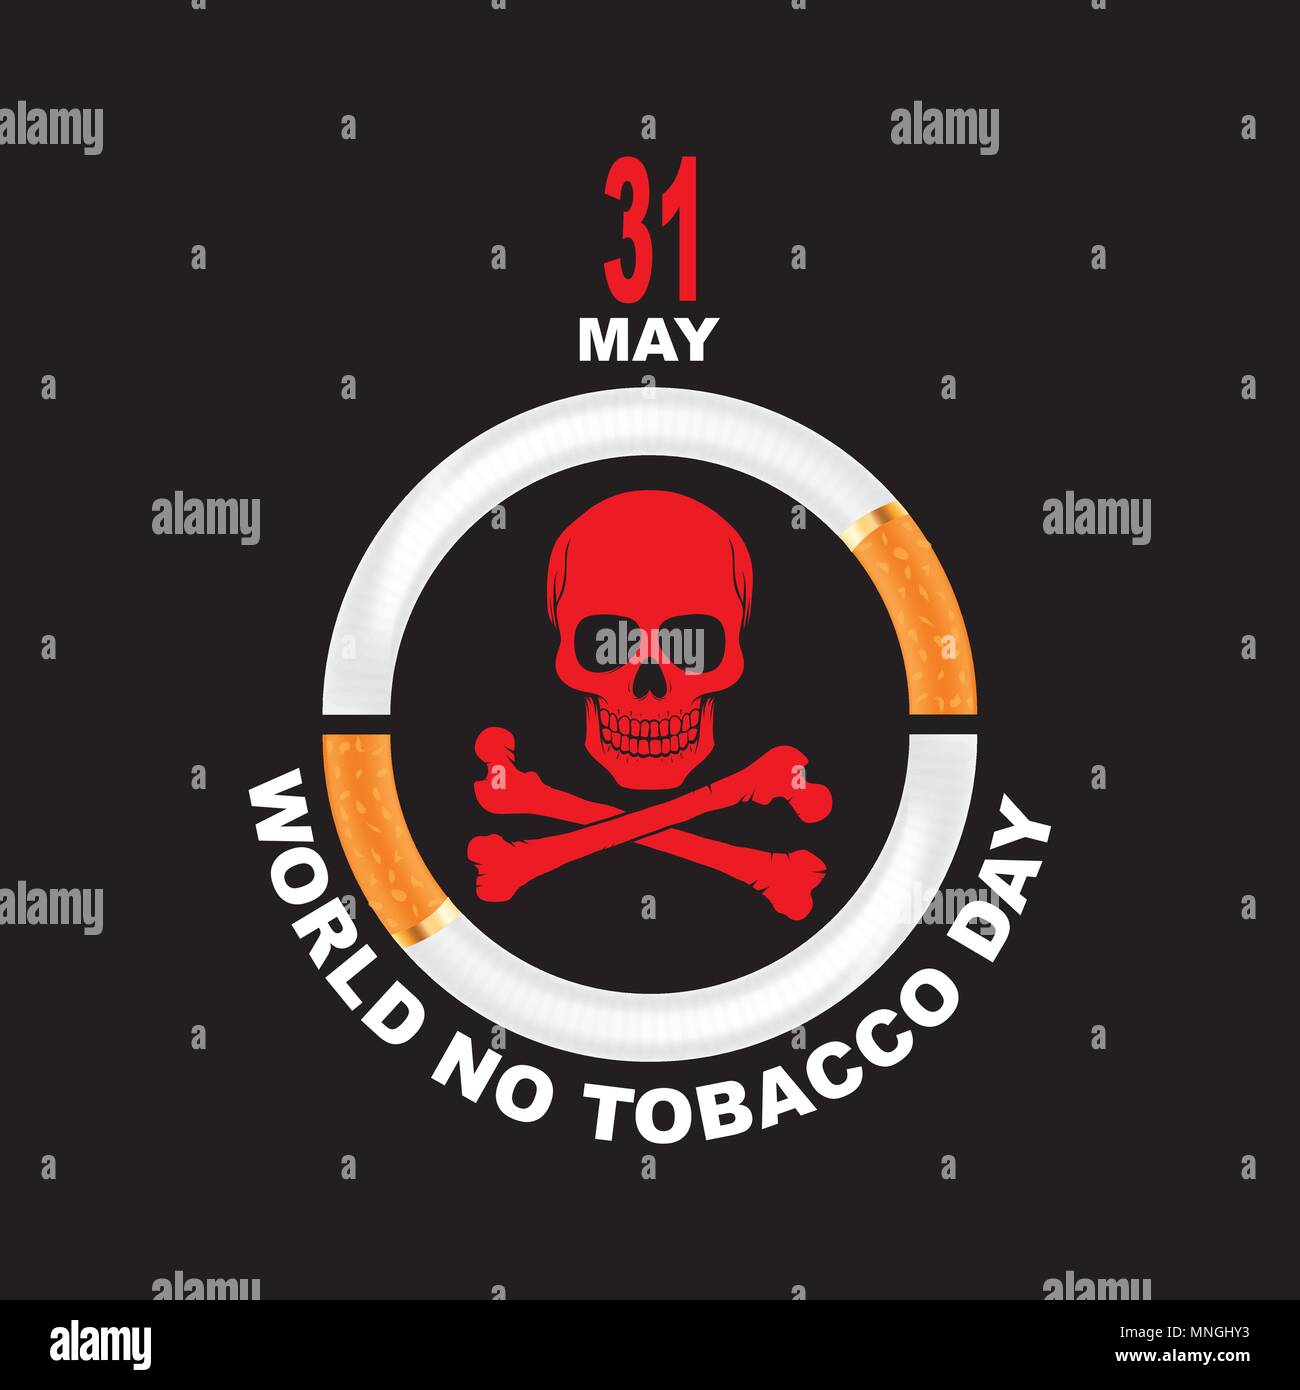 World No Tobacco Day Poster Consumed Stock Vector (Royalty Free) 2300675993  | Shutterstock